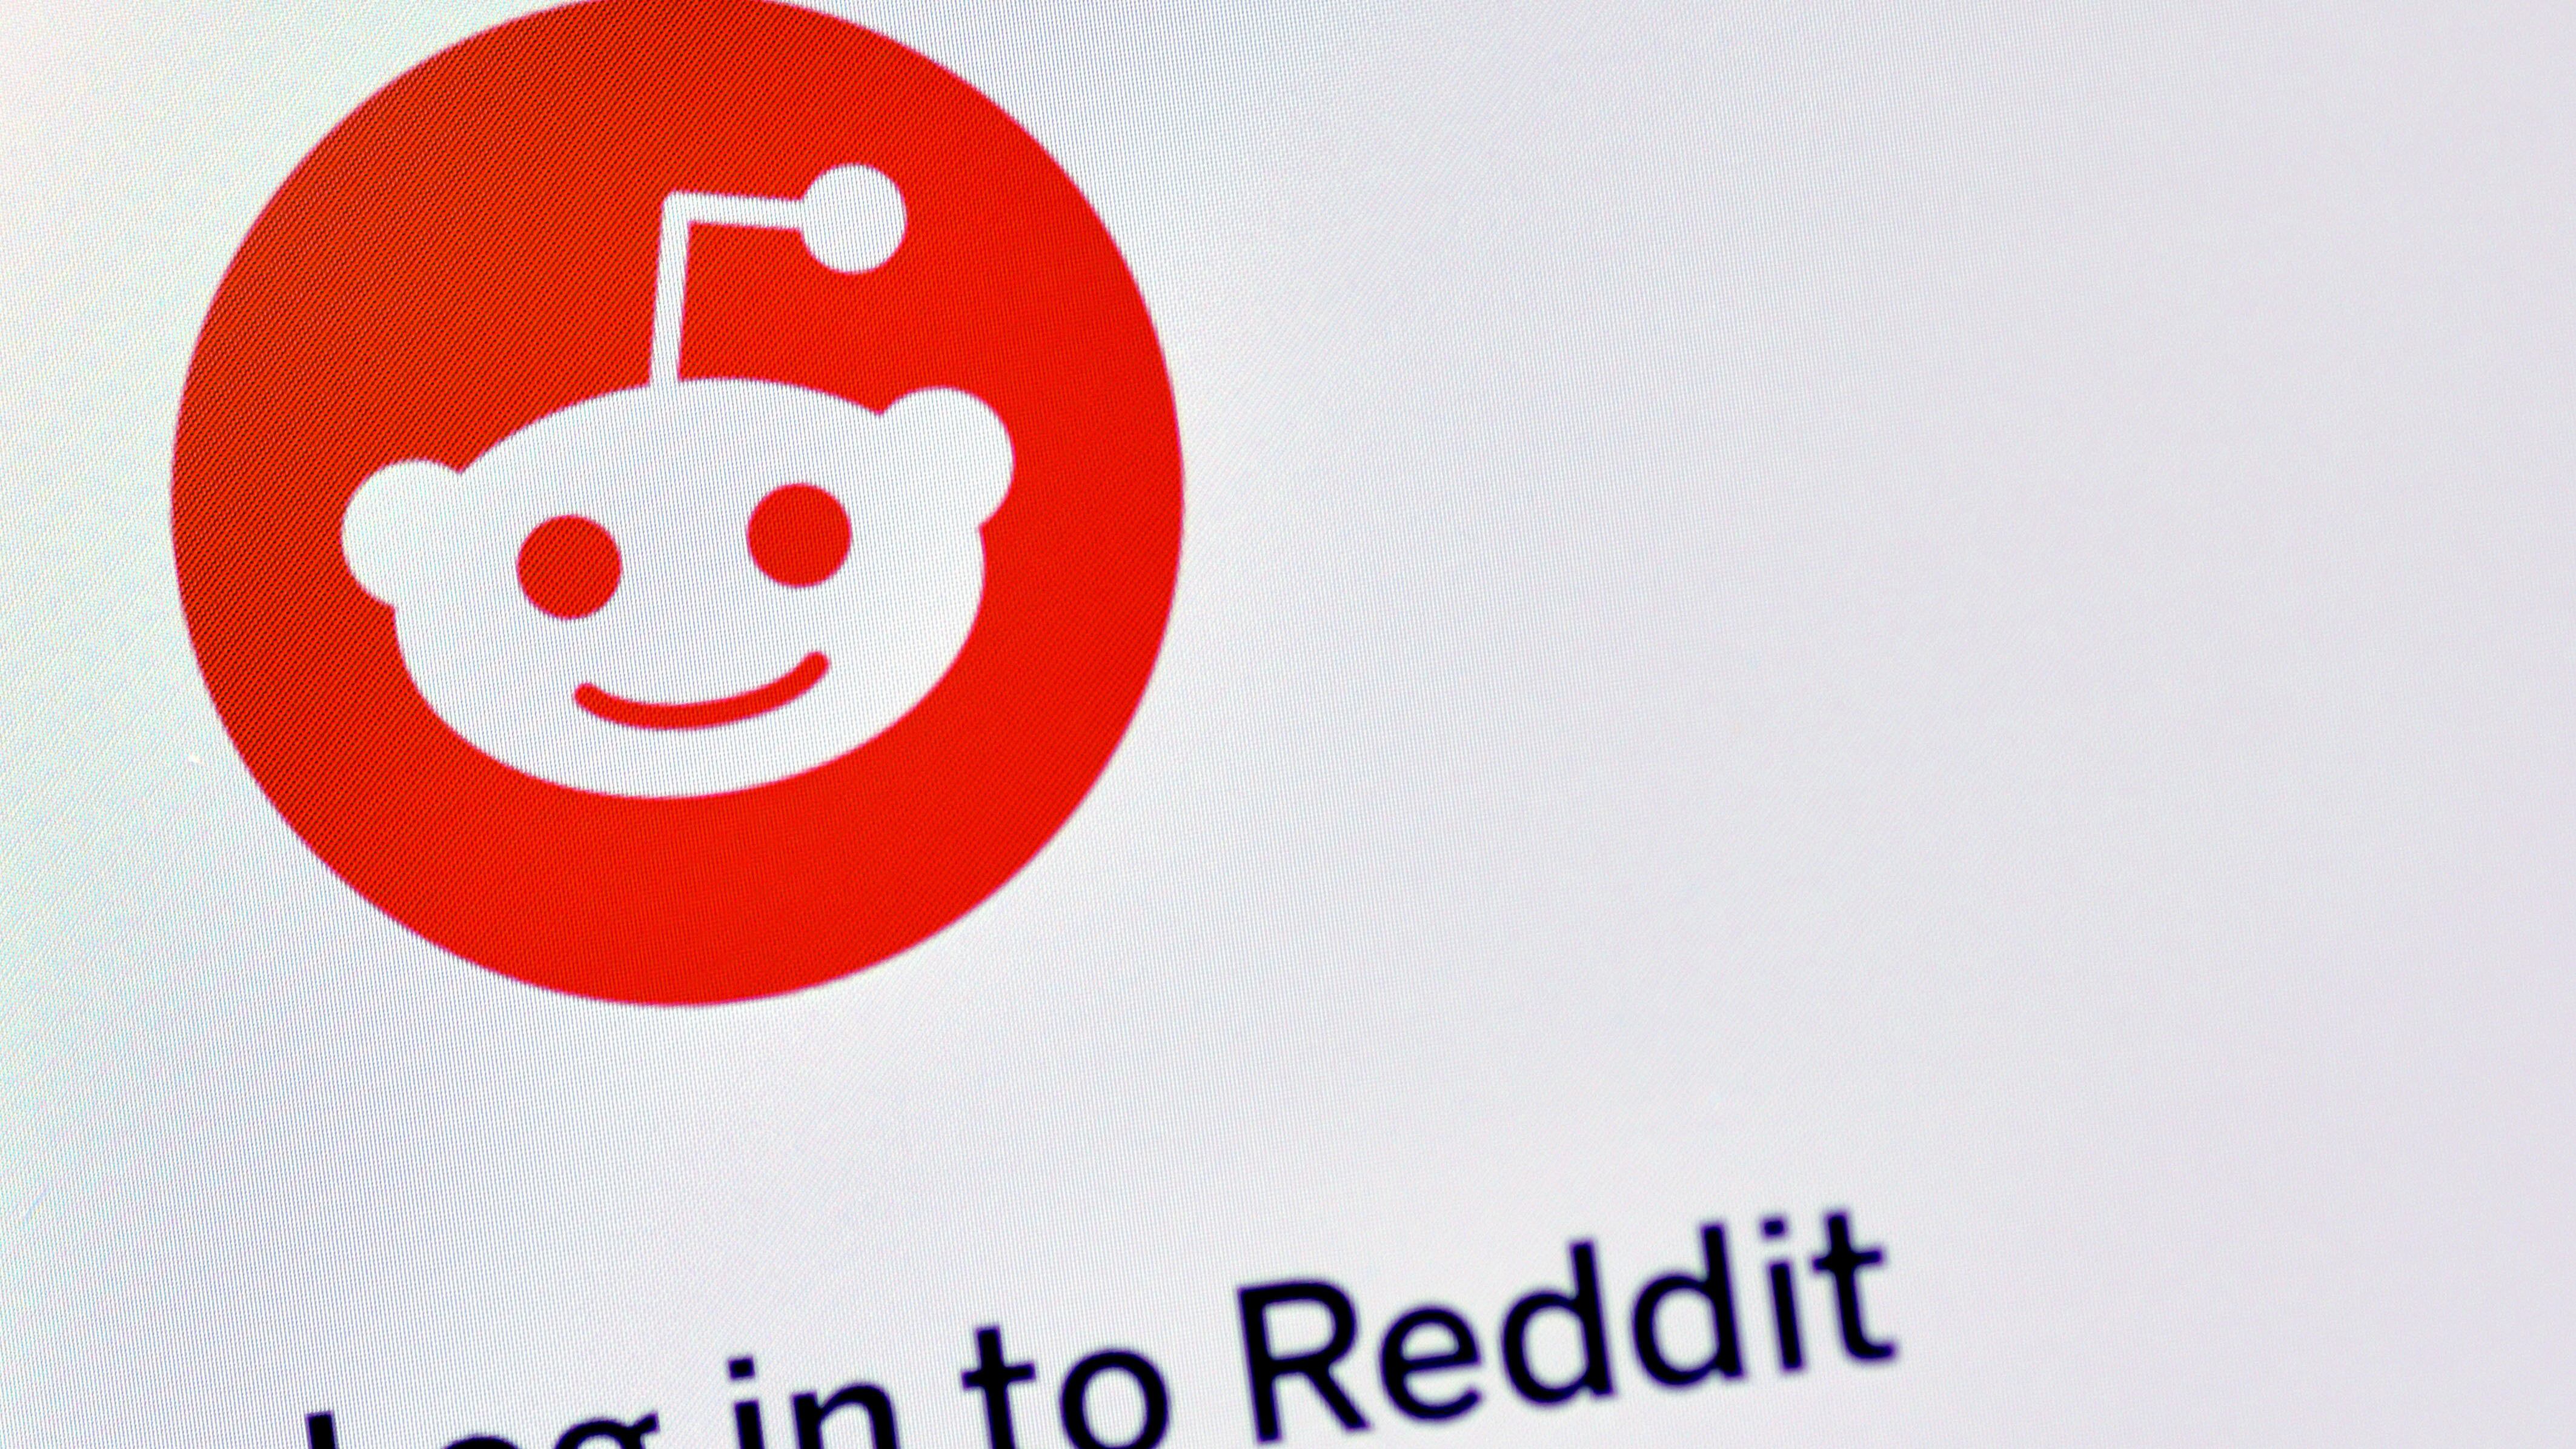 Reddit users and moderators will get access to new AI-powered features as part of the deal